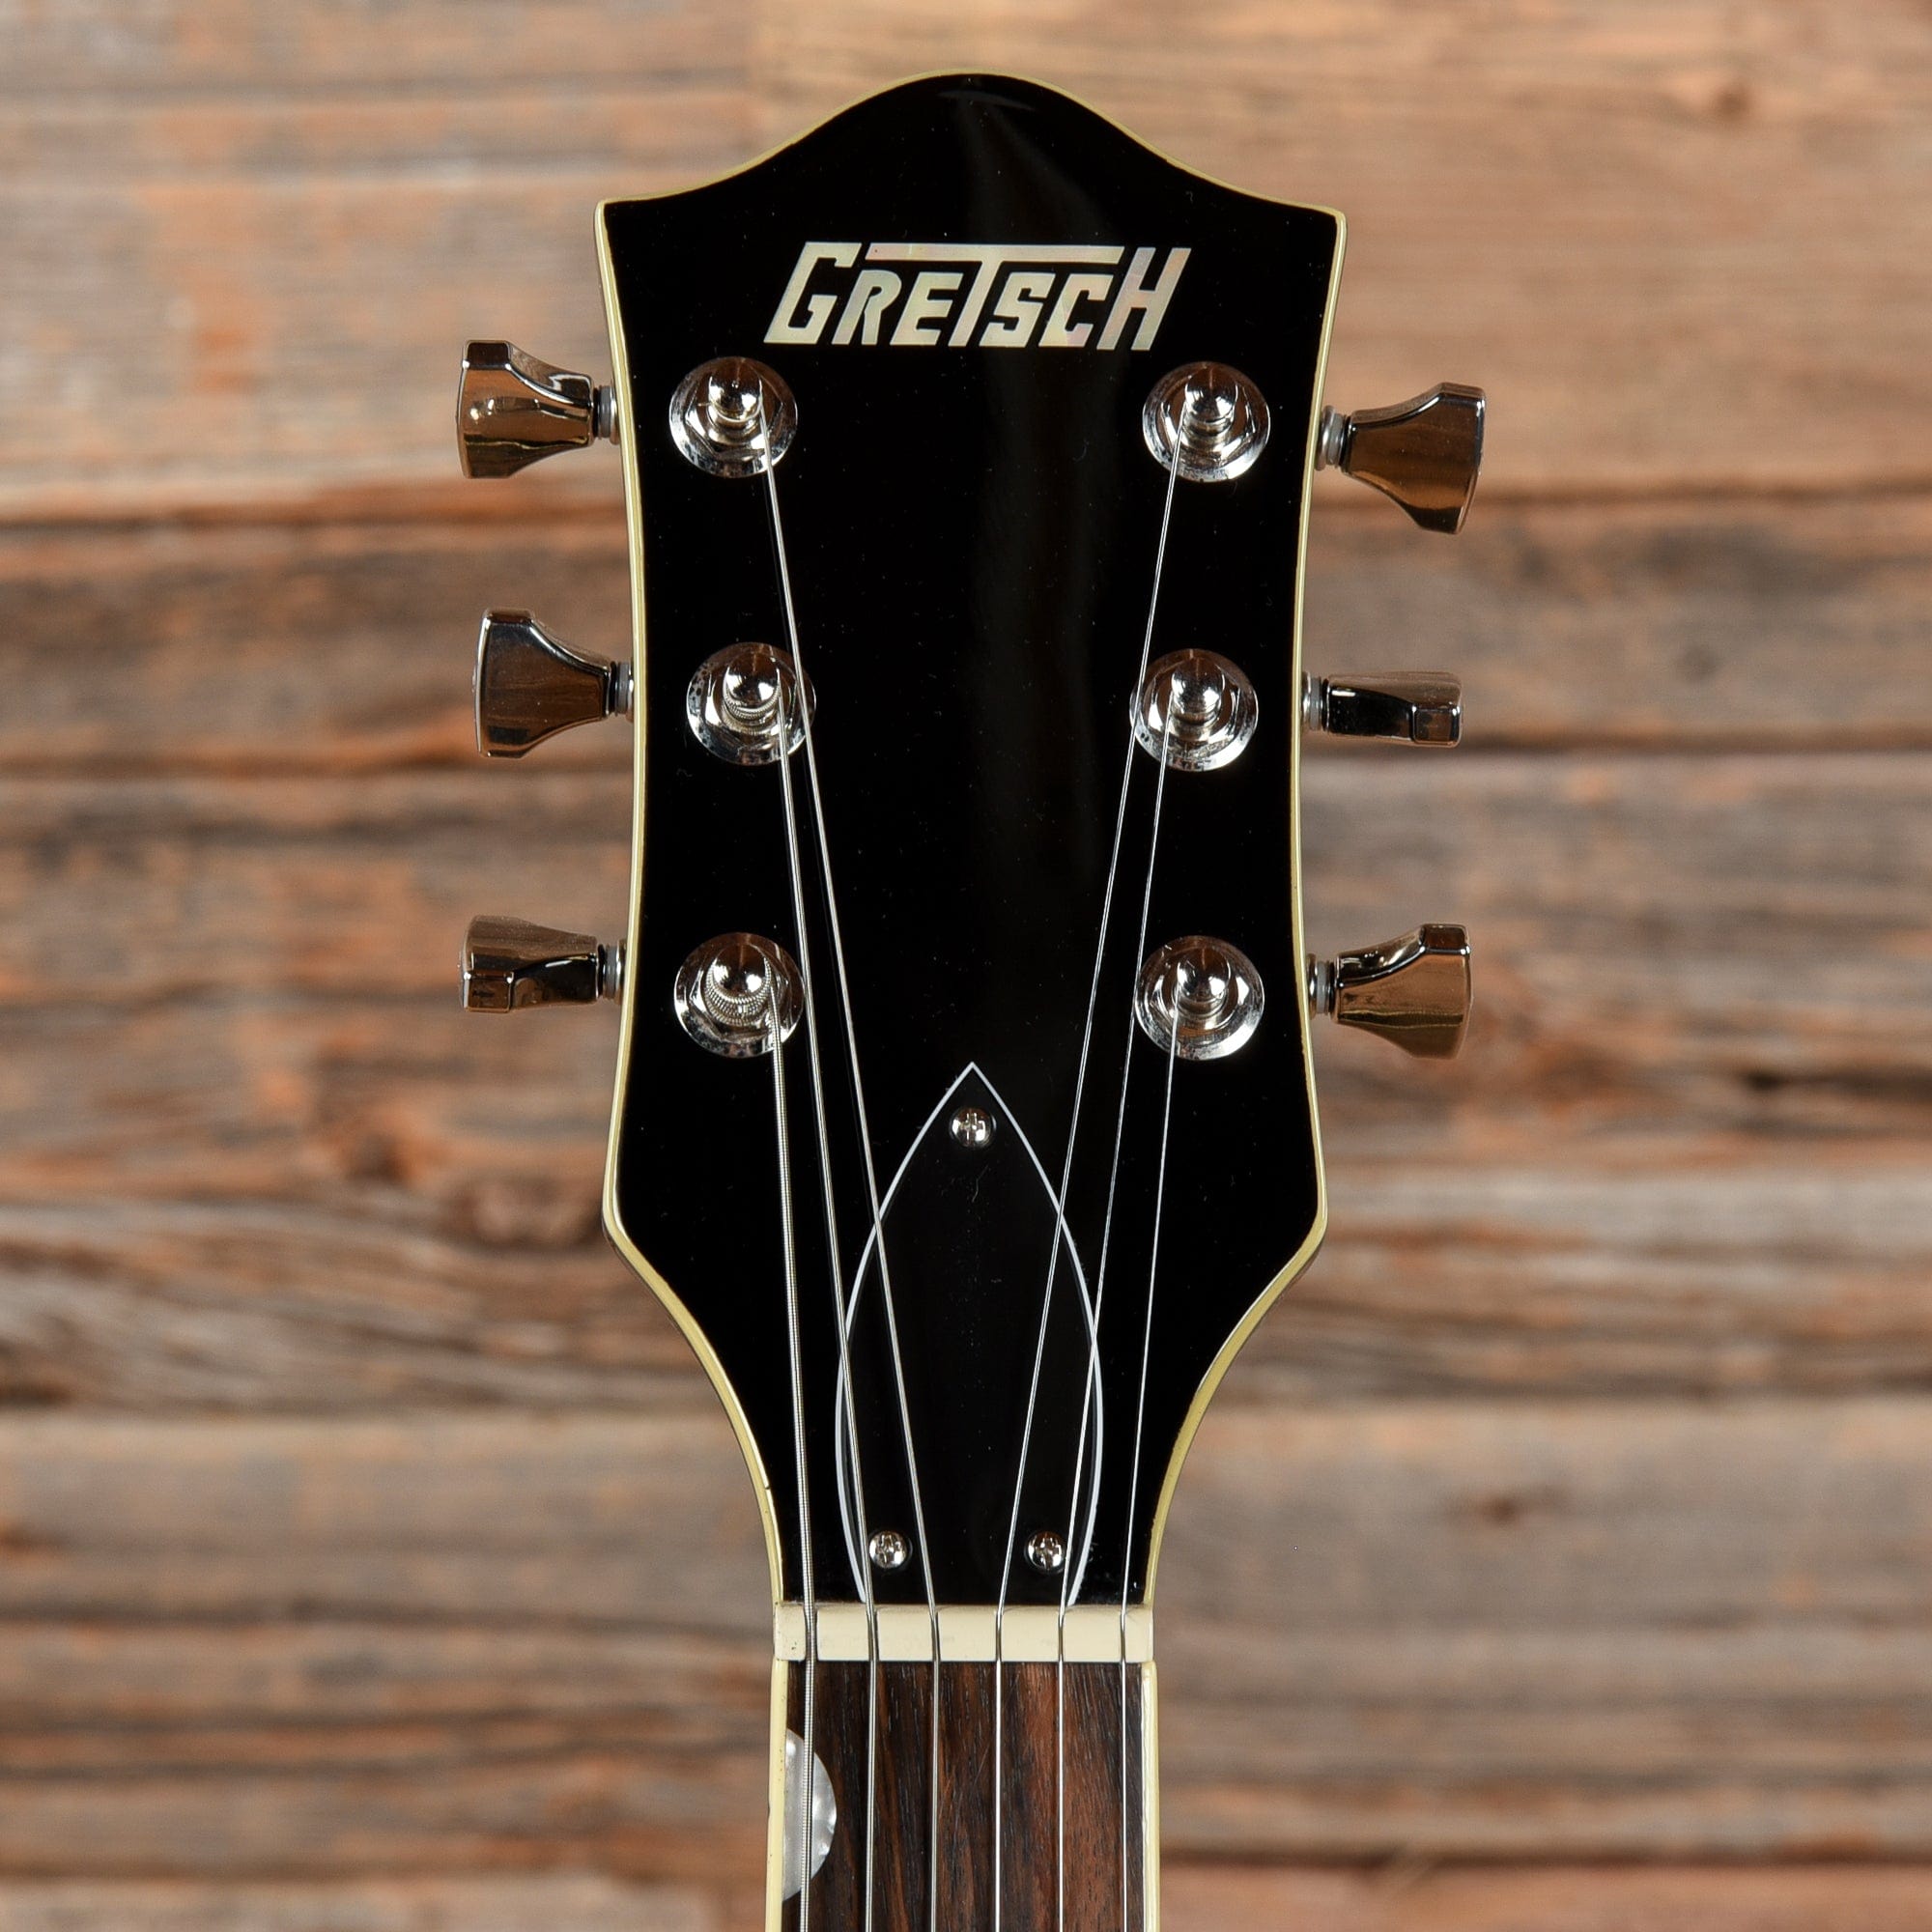 Gretsch G5622T Electromatic Center Block Double Cutaway with Bigsby Black 2018 Electric Guitars / Semi-Hollow